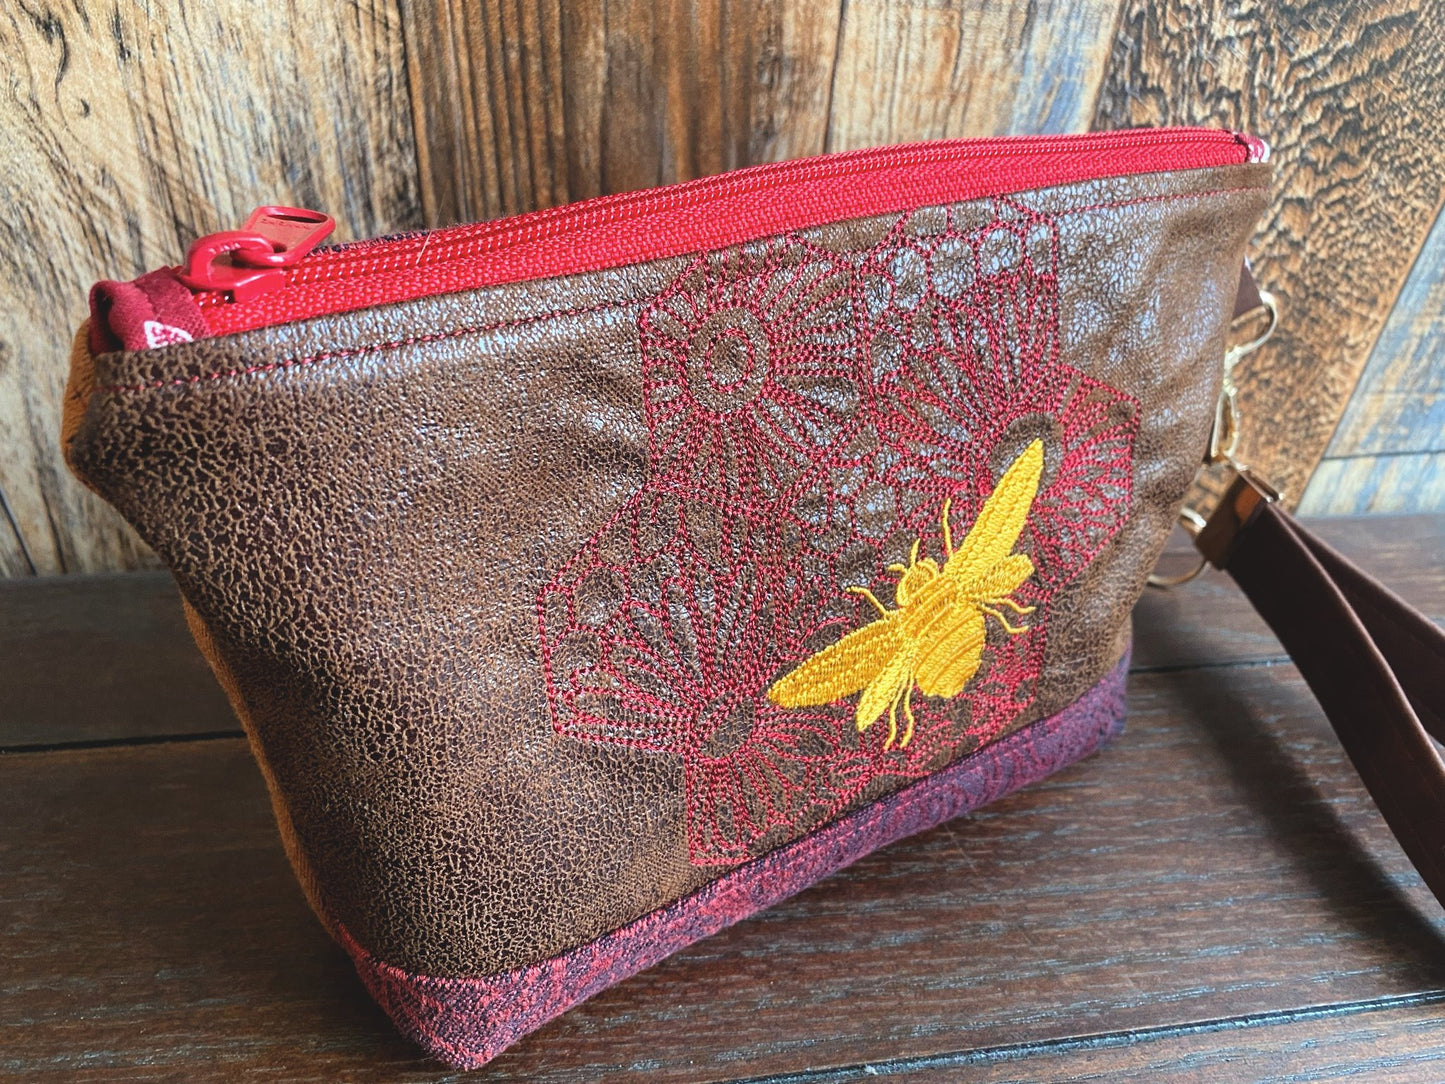 Bees and Roses Grab-and-Go Zipper Bag